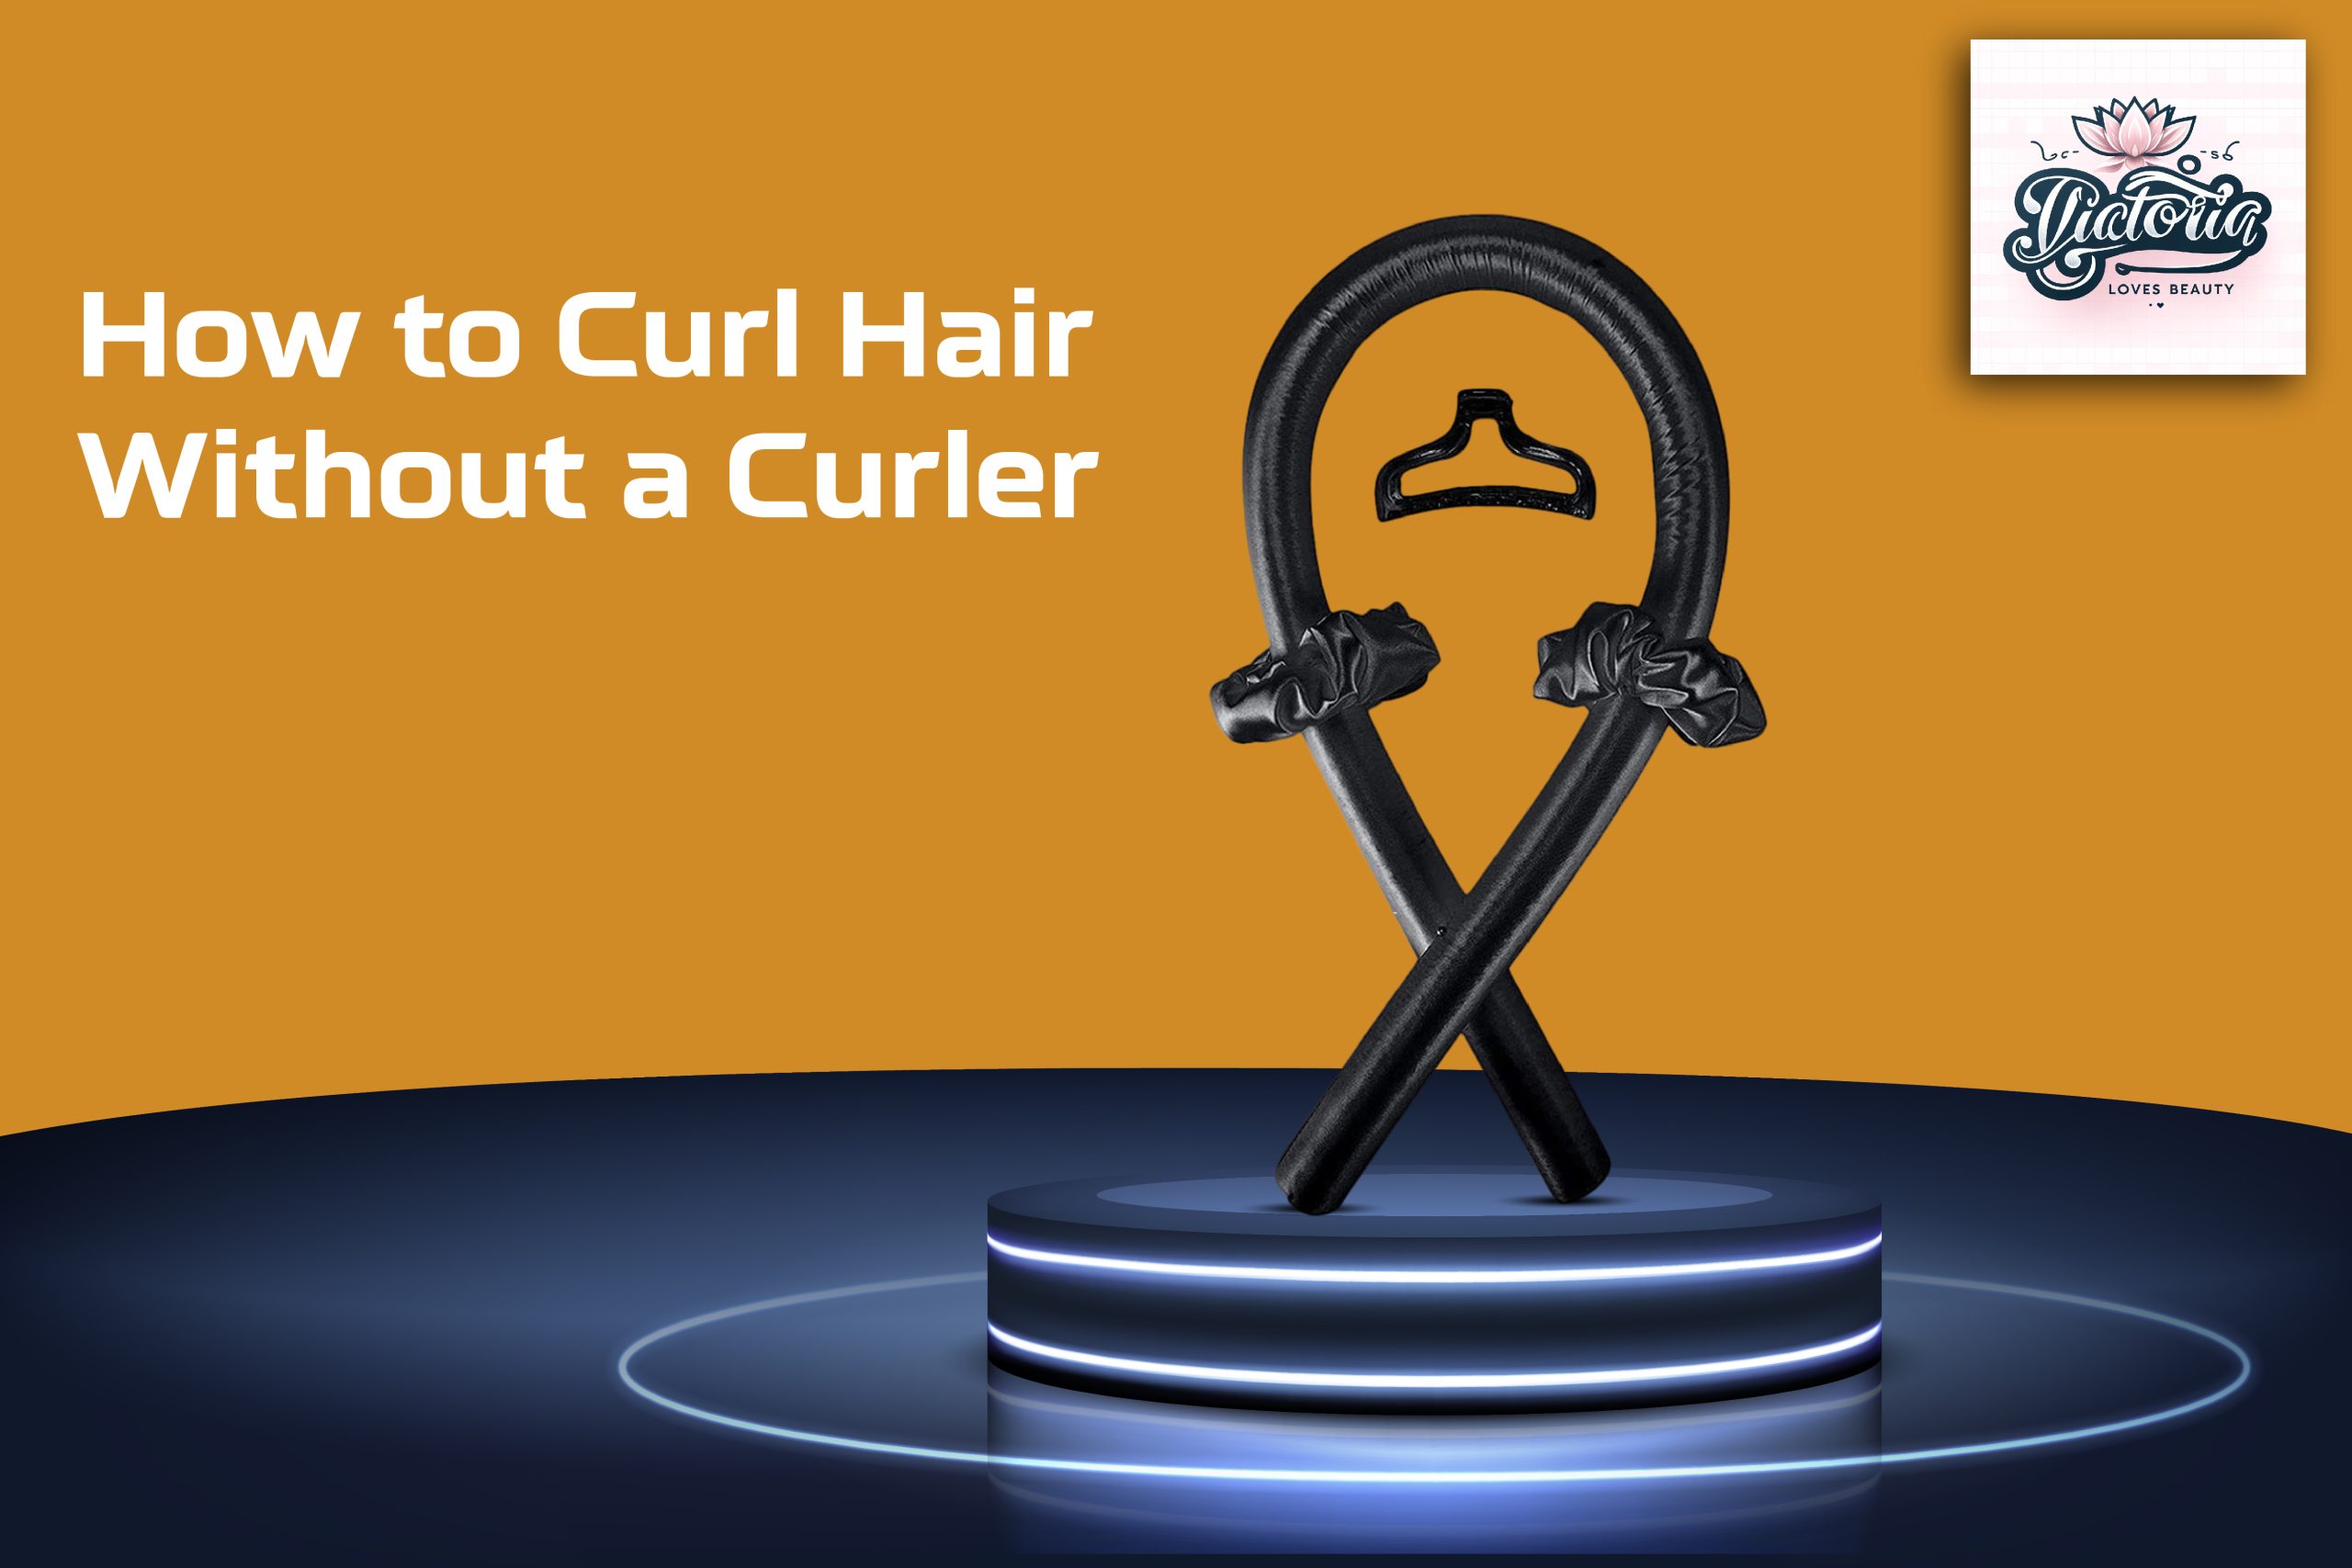 Curl Hair Without a Curler